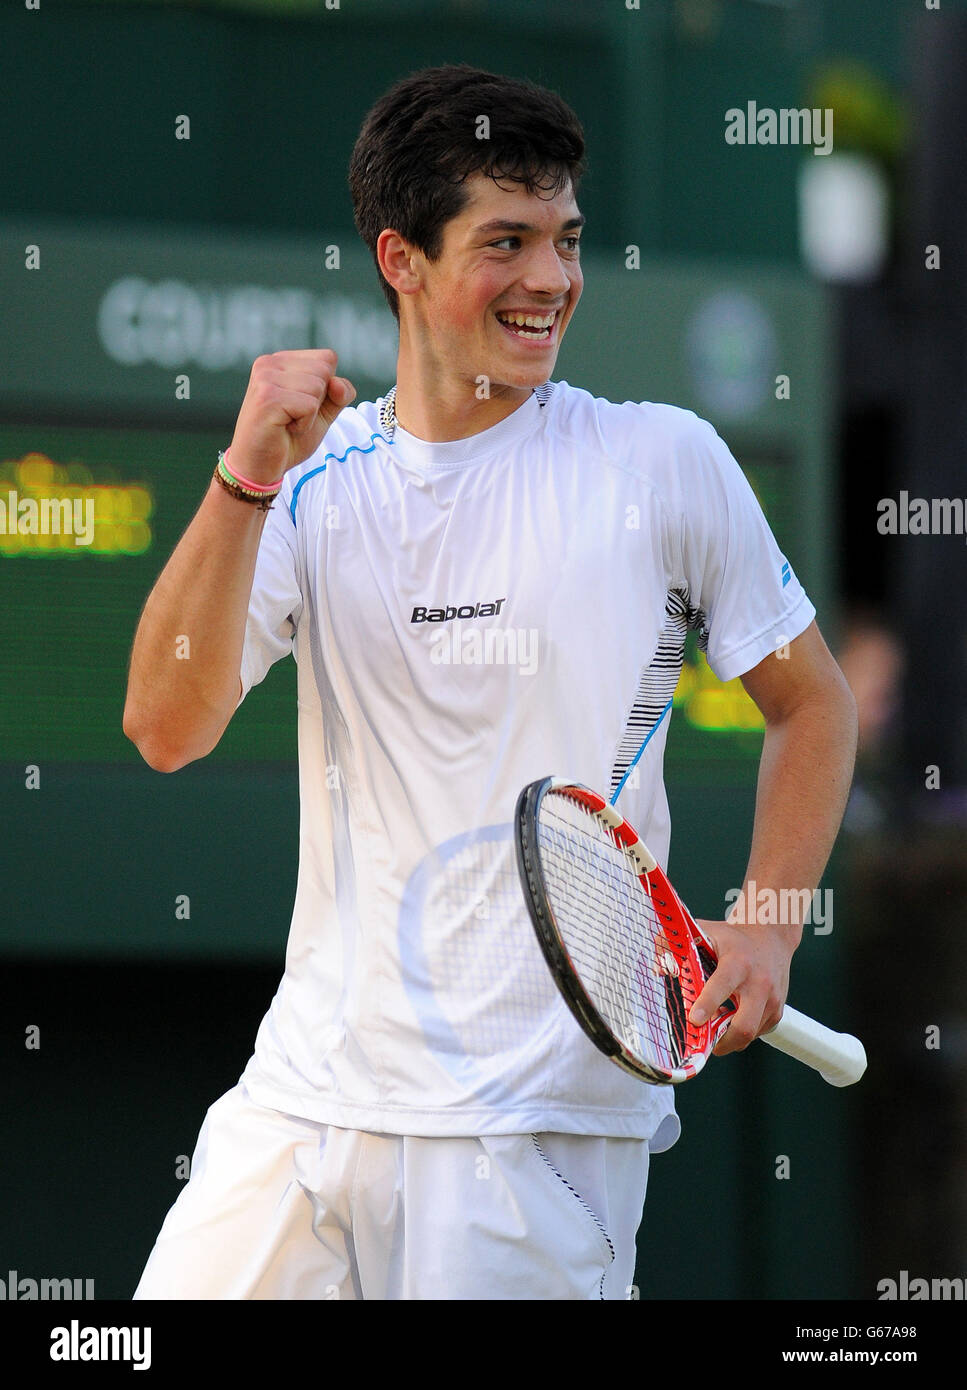 Great Britains Julian Cash celebrates defeating Australias Harry Bourchier during day seven of the Wimbledon Championships at The All England Lawn Tennis and Croquet Club, Wimbledon Stock Photo